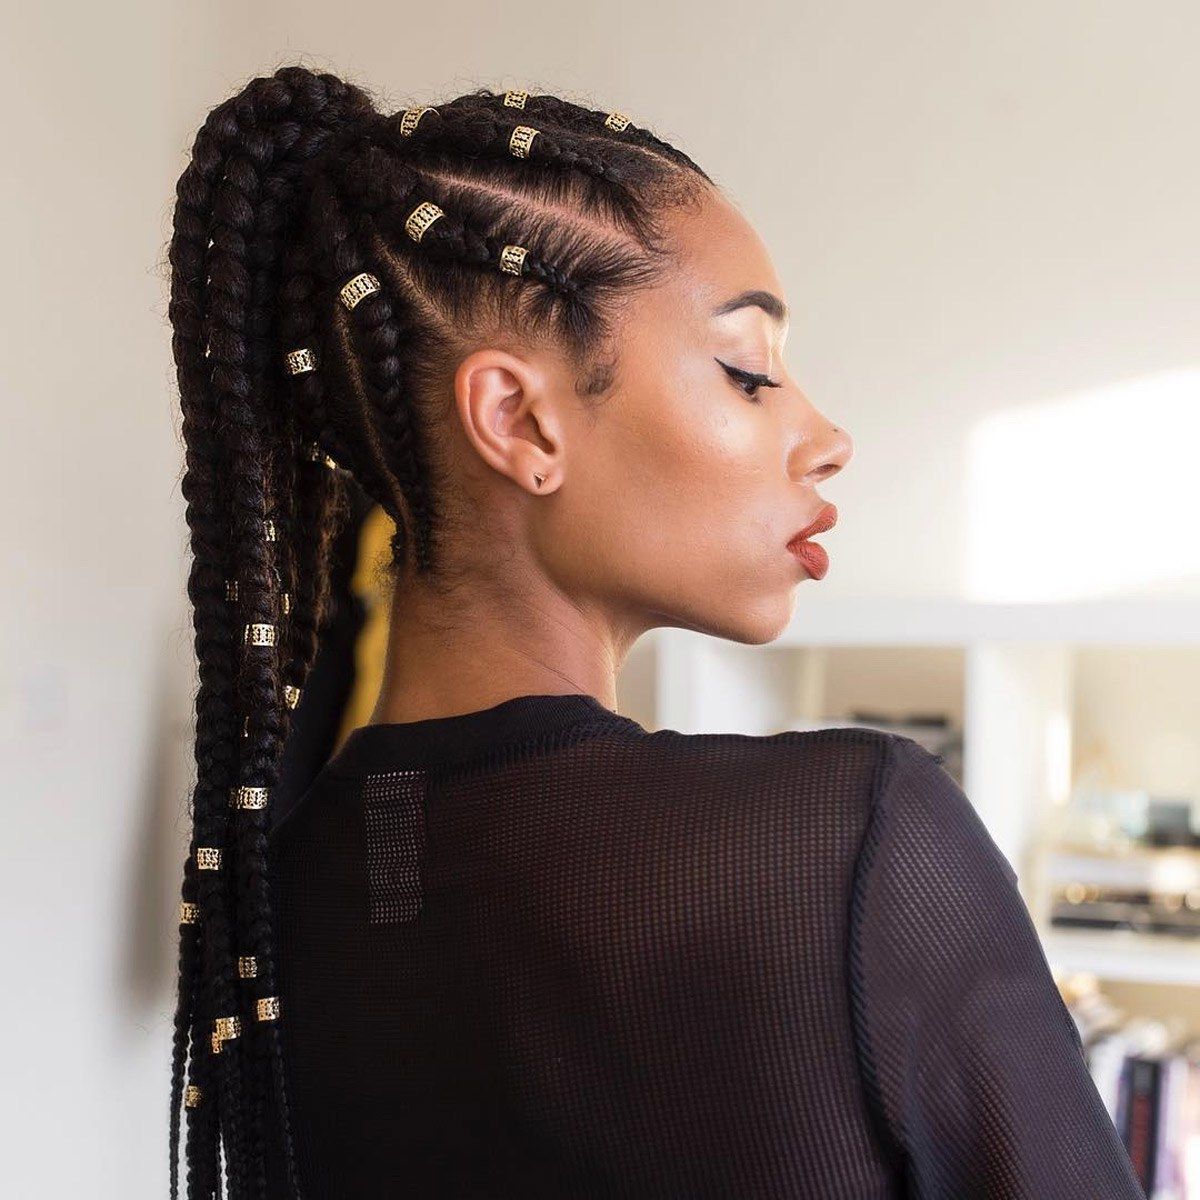 37 Cool Ponytail Hairstyles To Try In 2019 (Gallery 224 of 292)